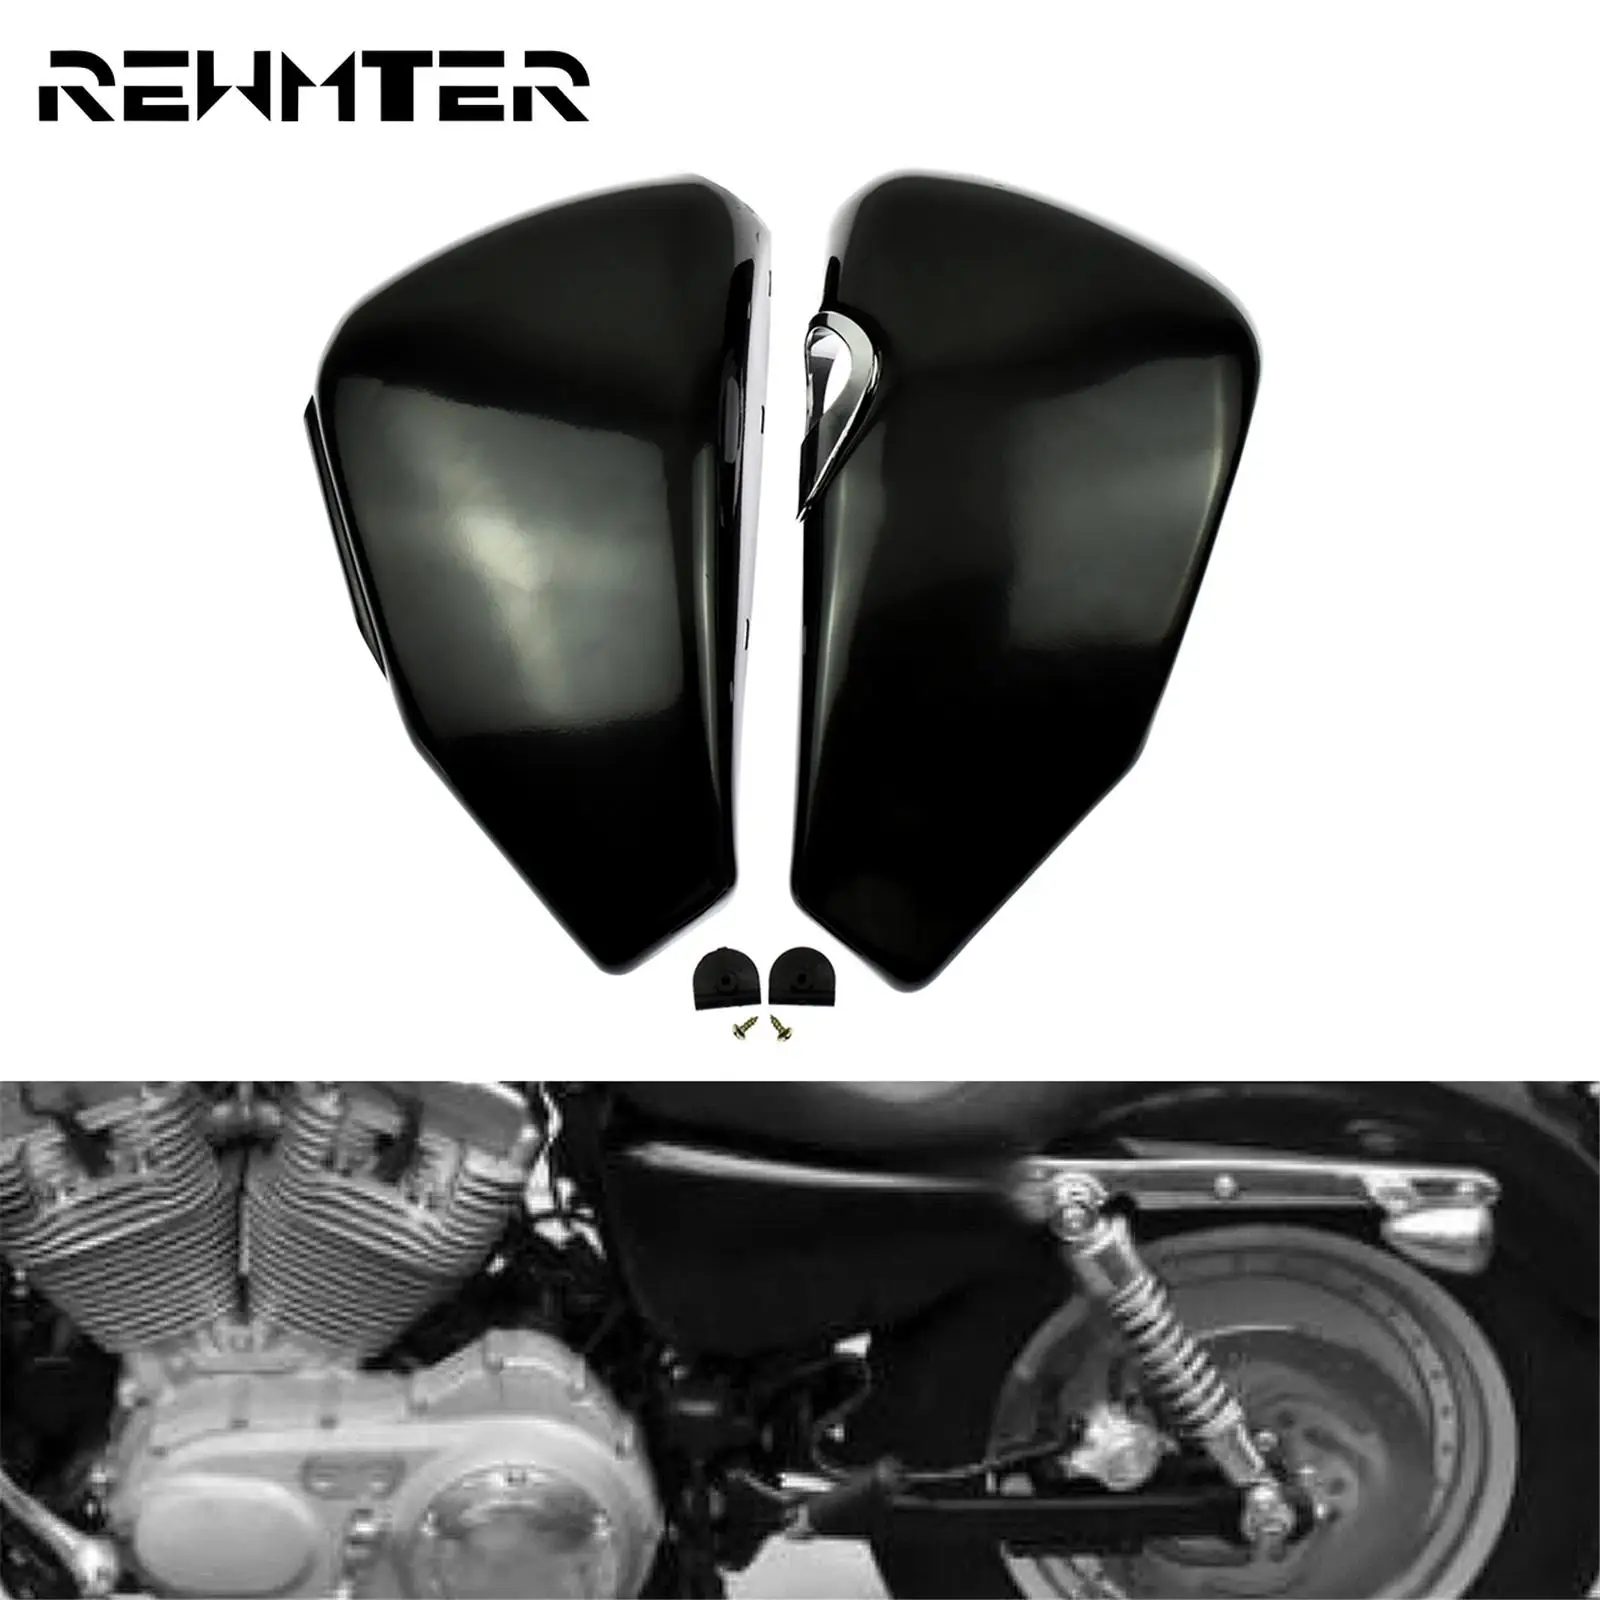 Motorcycle Left Right Battery Cover Set Bright Black Metal For Harley Sportster Iron 1200 883 XL883 XL1200 Forty Eight 2004-2013